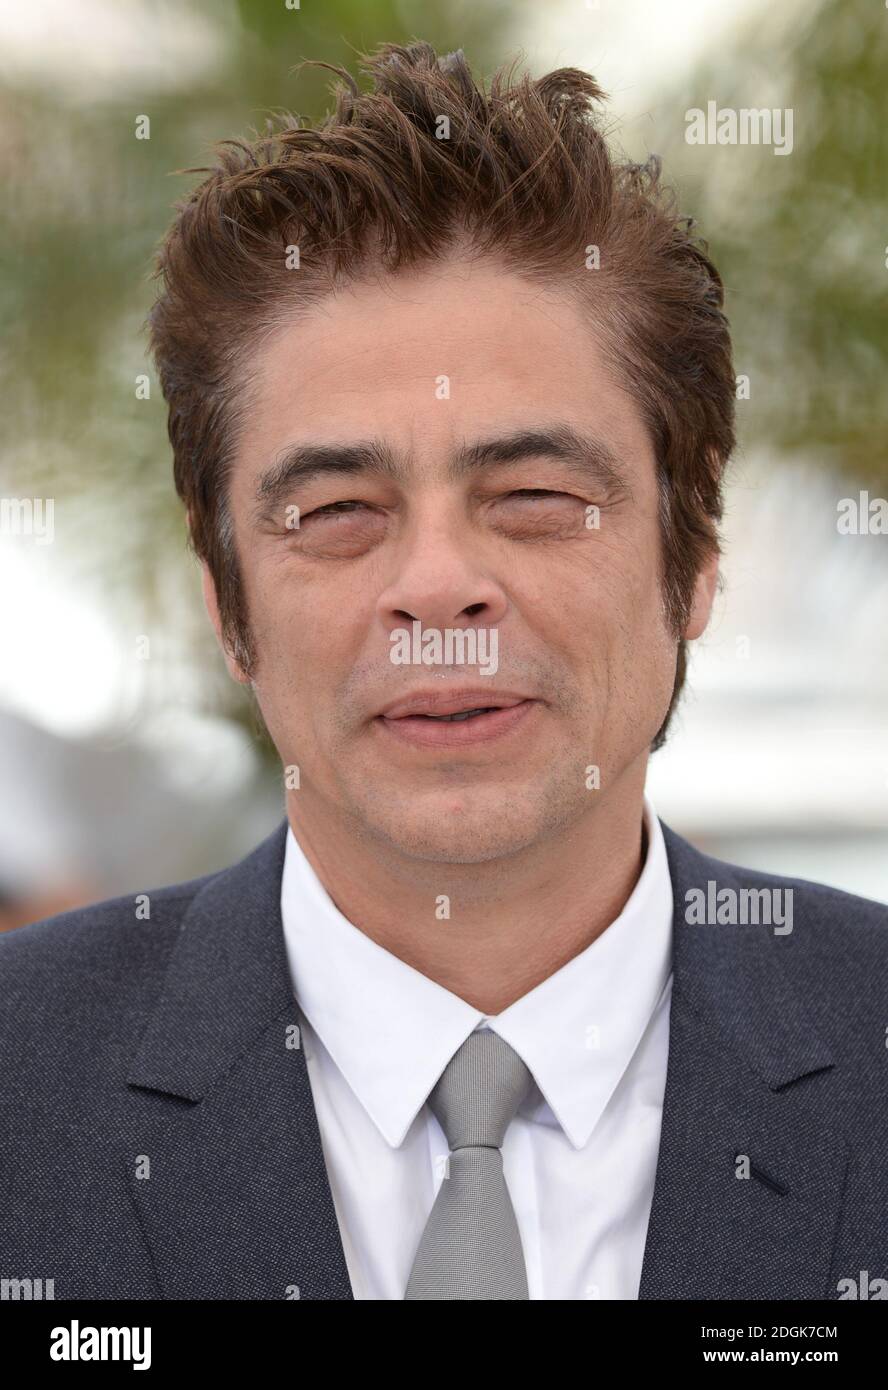 Benicio Del Toro attending the Sicario photocall taking place during the 68th Festival de Cannes held at the Palais de Festival, Cannes, France (Mandatory Credit: Doug Peters/EMPICS Entertainment)   Stock Photo